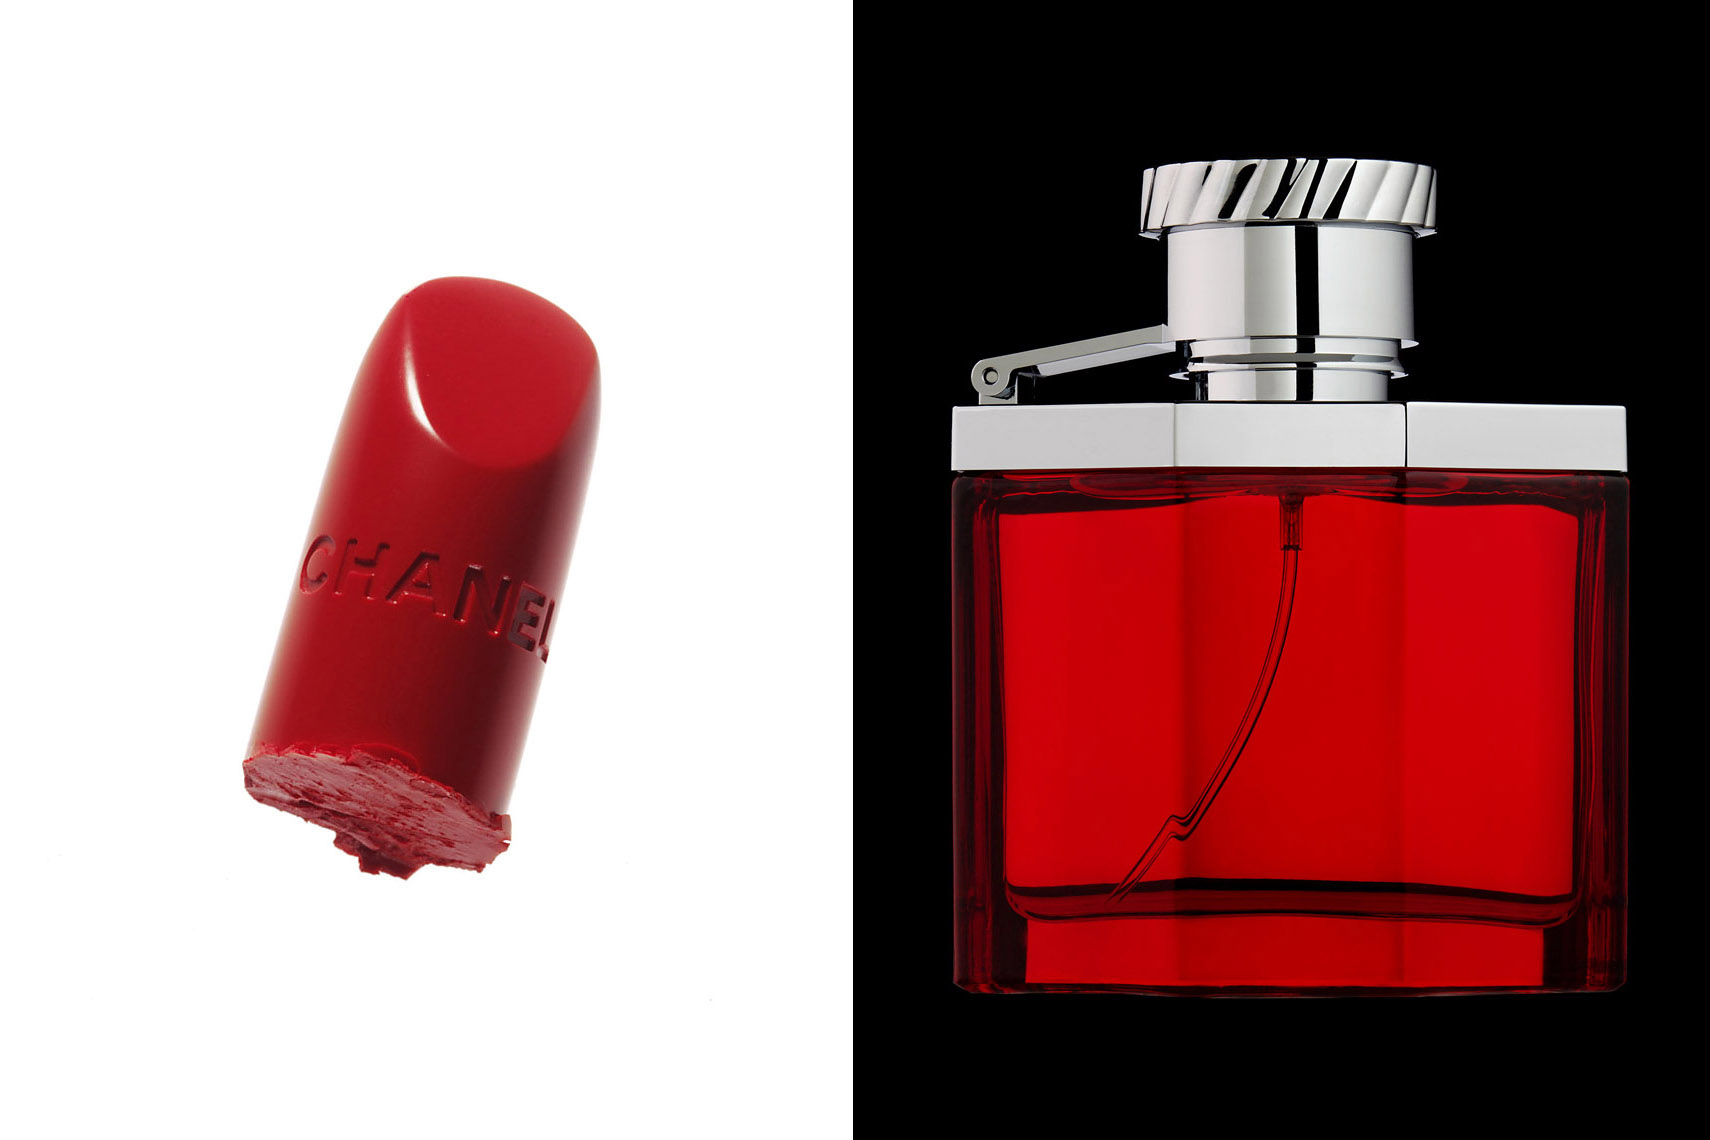 Cosmetics Still Life, Fragrance Bottle and Chopped Lipstick